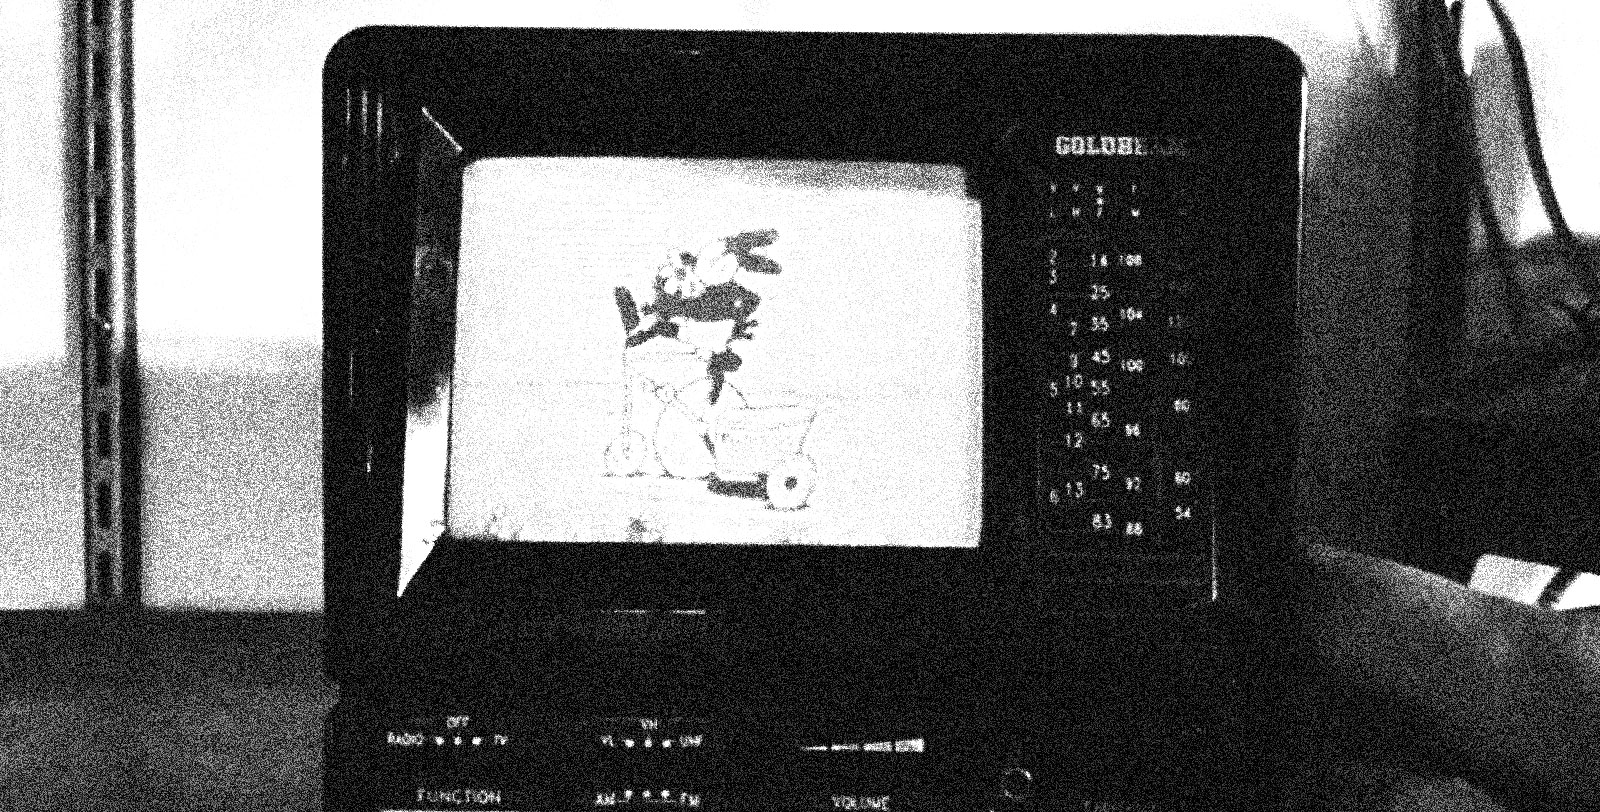 A grainy black-and-white image of a small TV showing a cartoon rabbit on a bicycle